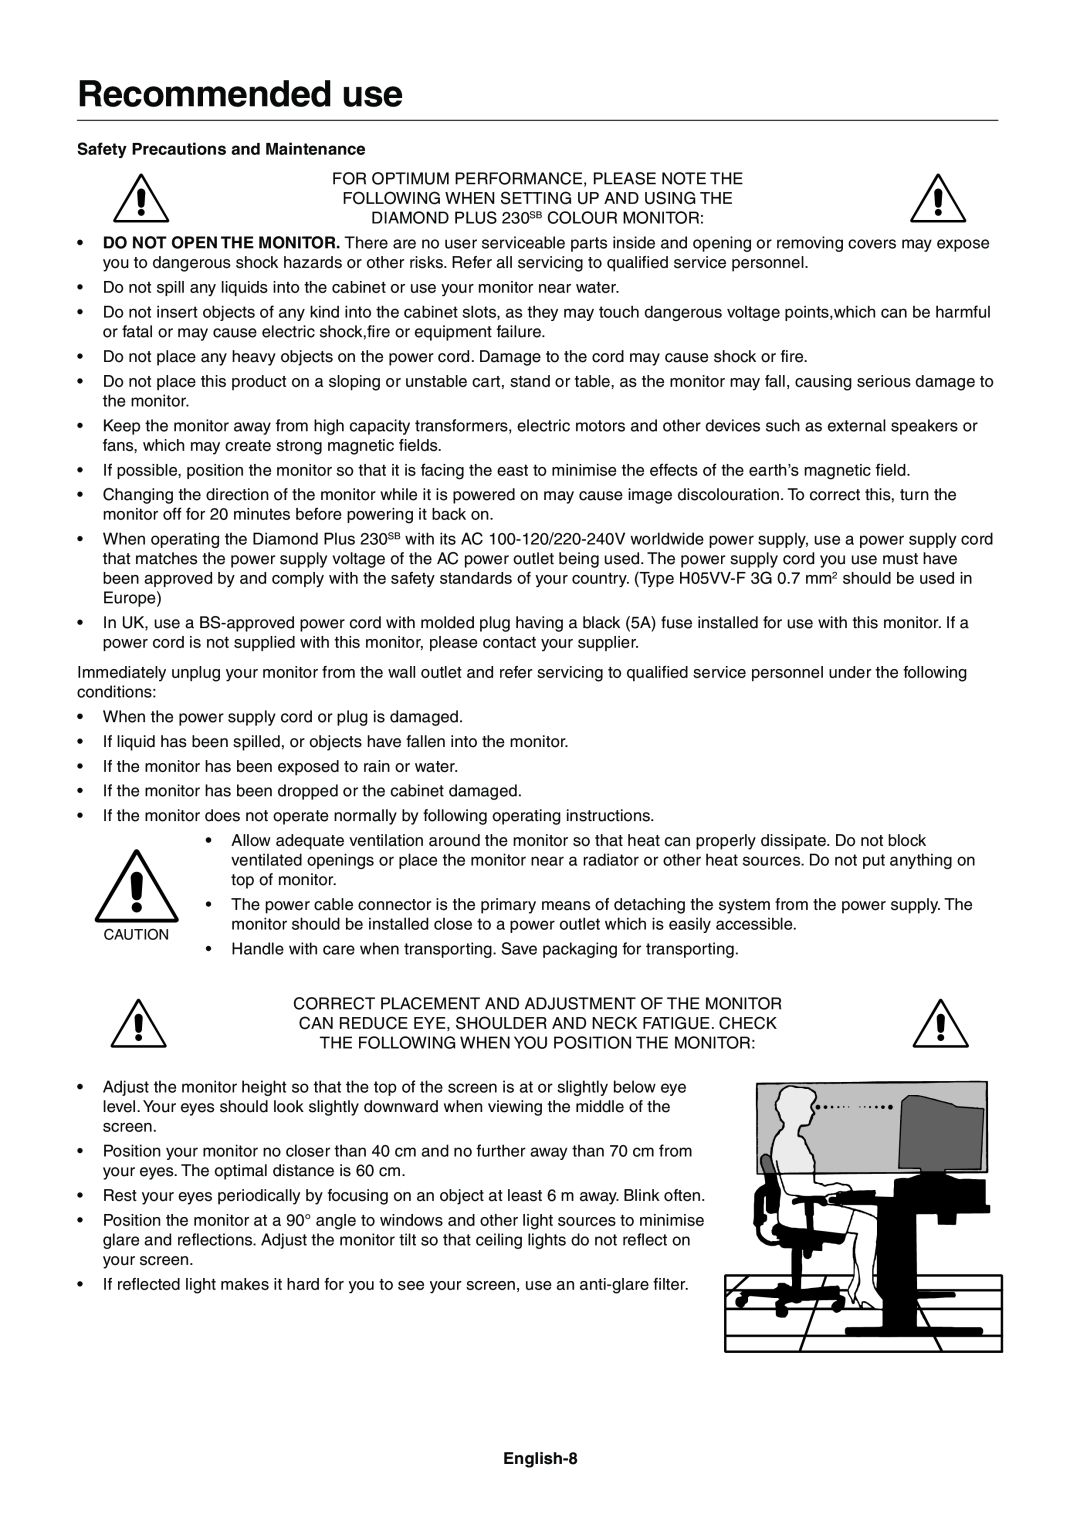 Mitsubishi Electronics 230SB user manual Recommended use, Safety Precautions and Maintenance, English-8 